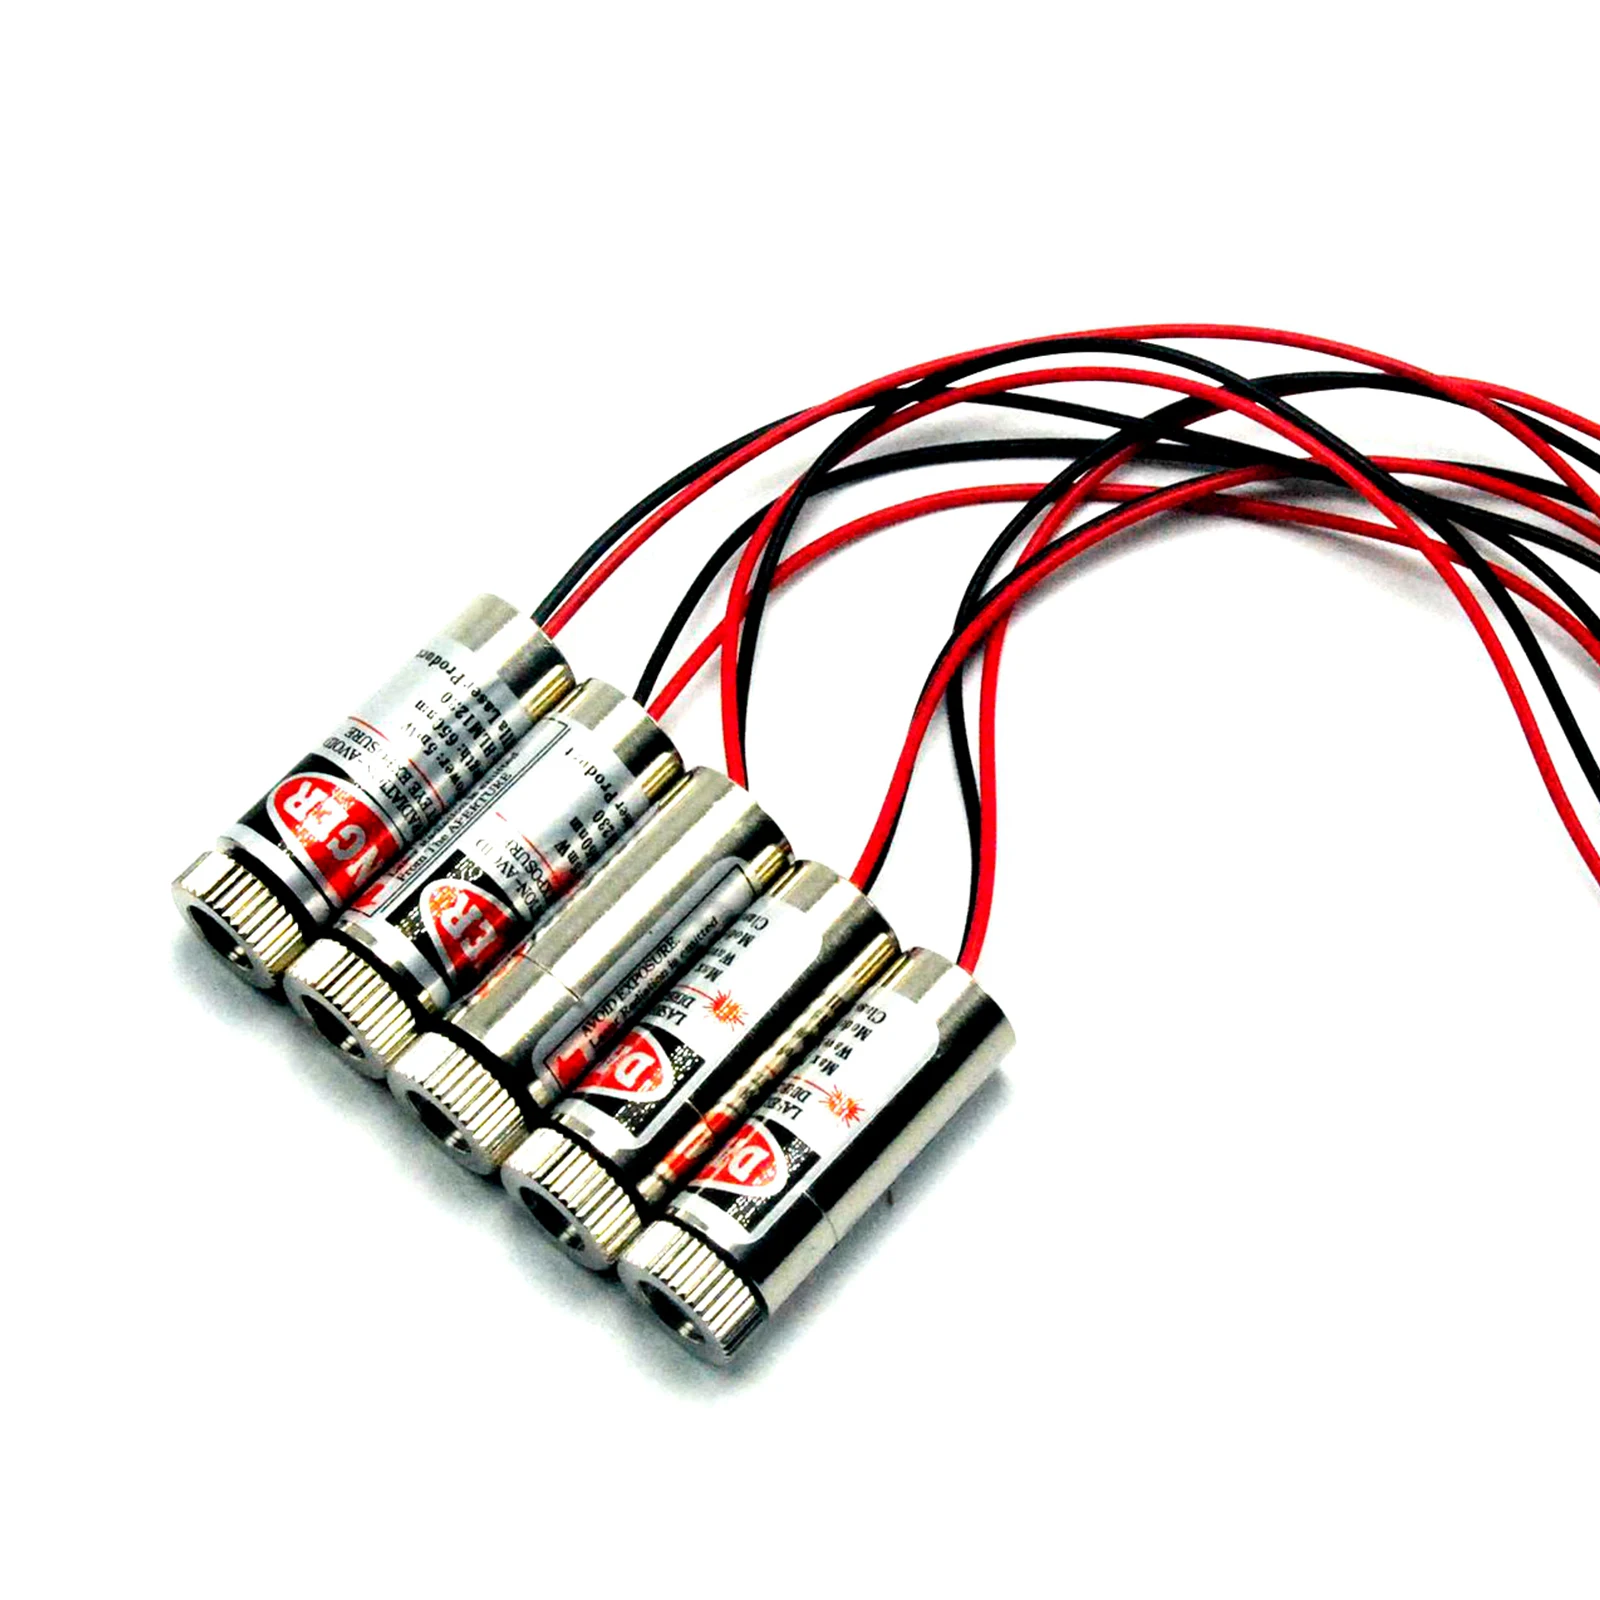 

Focusable Red Laser Diode Module 650nm 5mW 3-5V Red Laser Dot Shape with Driver (5pcs)